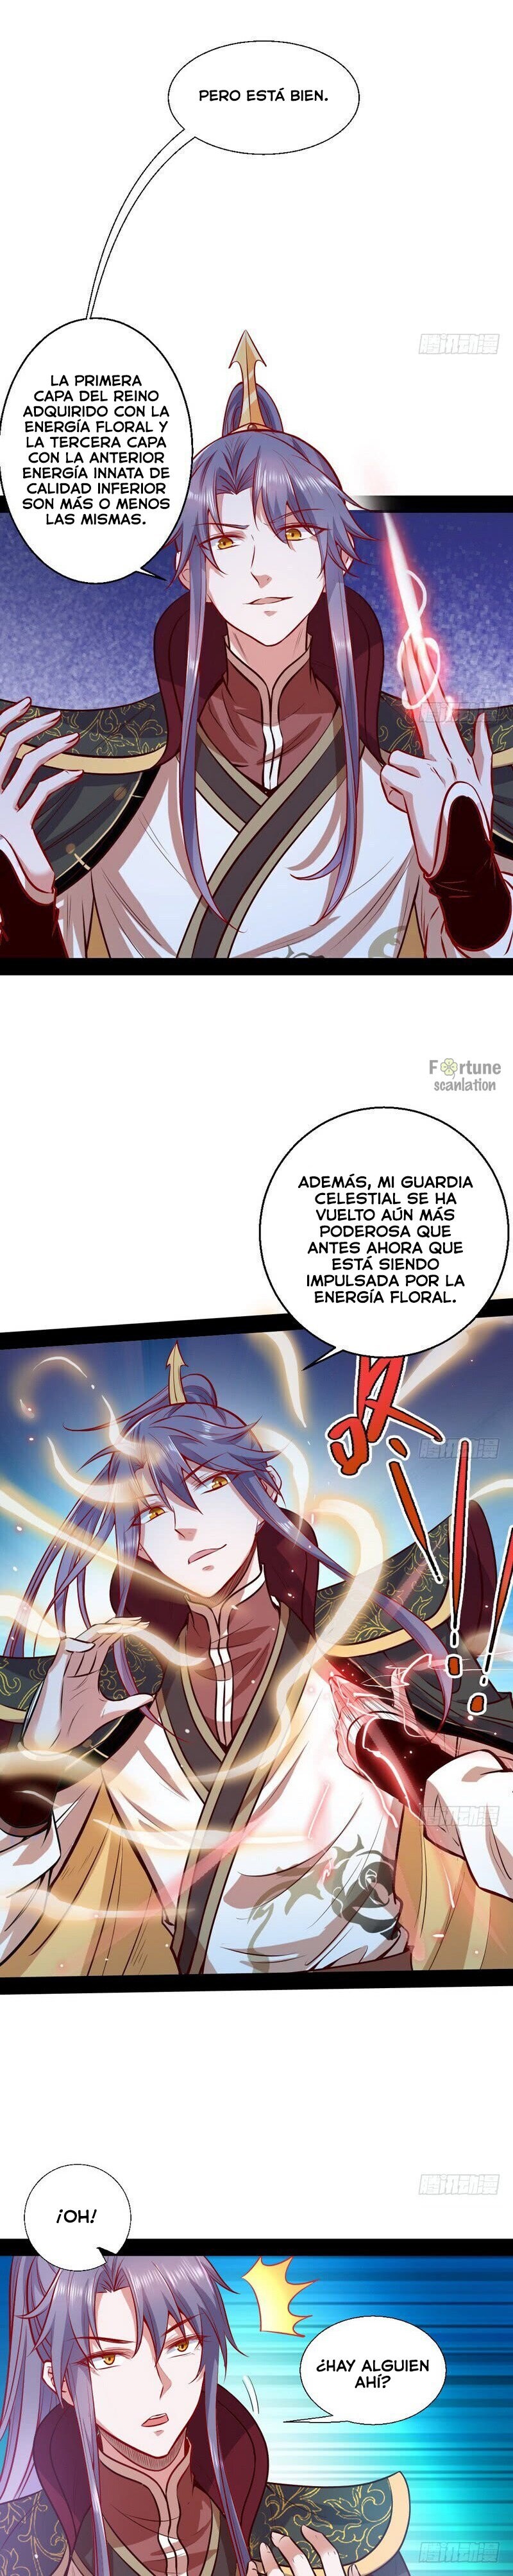 Manga Soy un dios maligno Chapter 29 image number 22